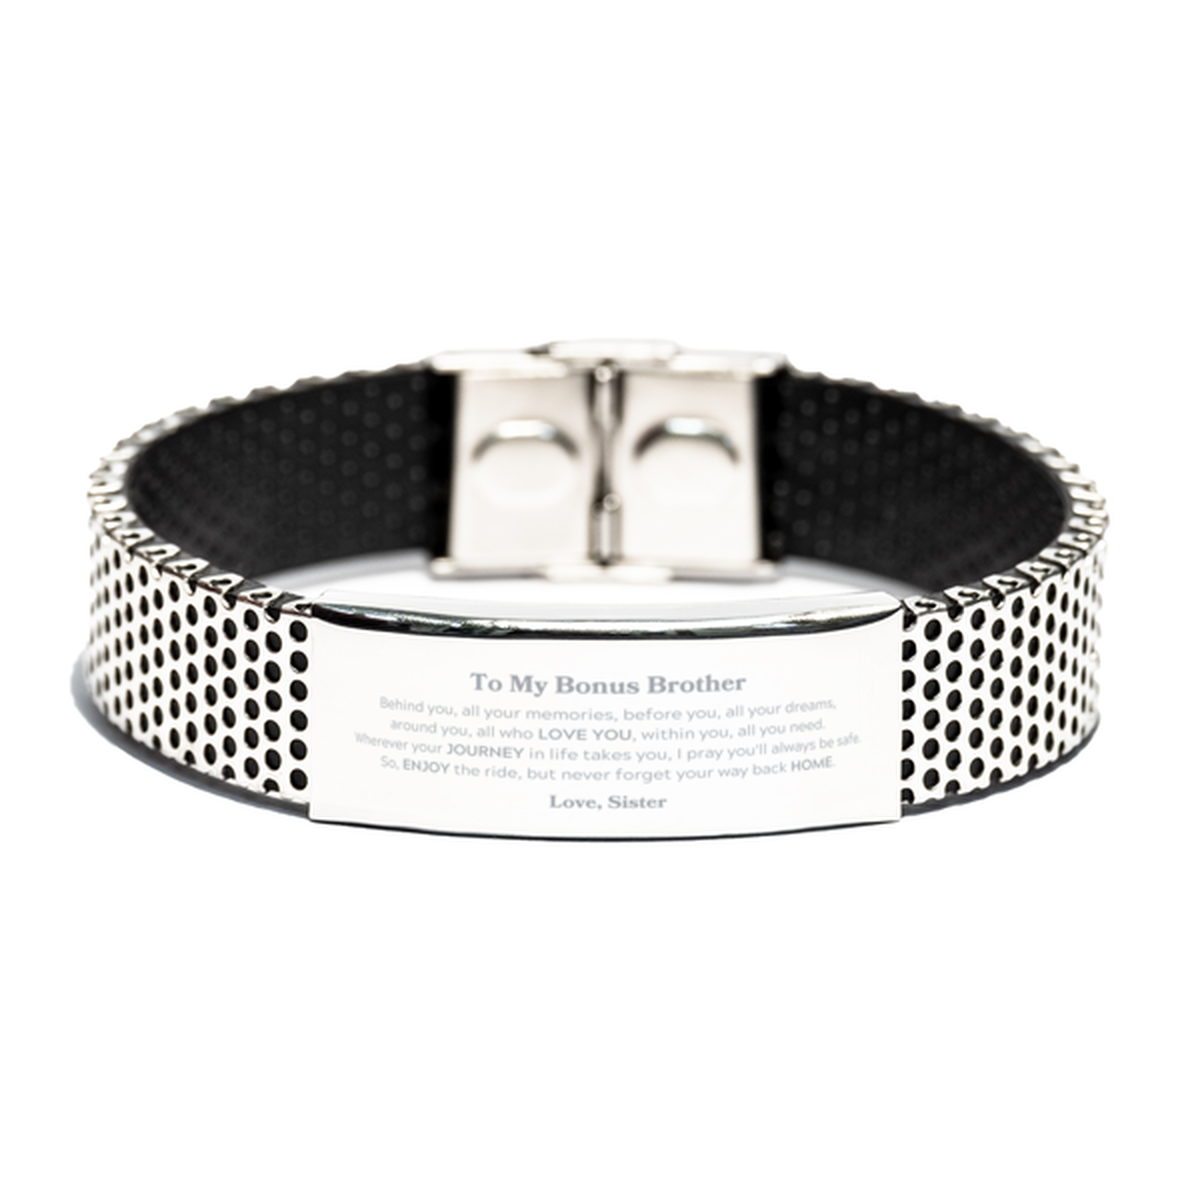 To My Bonus Brother Graduation Gifts from Sister, Bonus Brother Stainless Steel Bracelet Christmas Birthday Gifts for Bonus Brother Behind you, all your memories, before you, all your dreams. Love, Sister